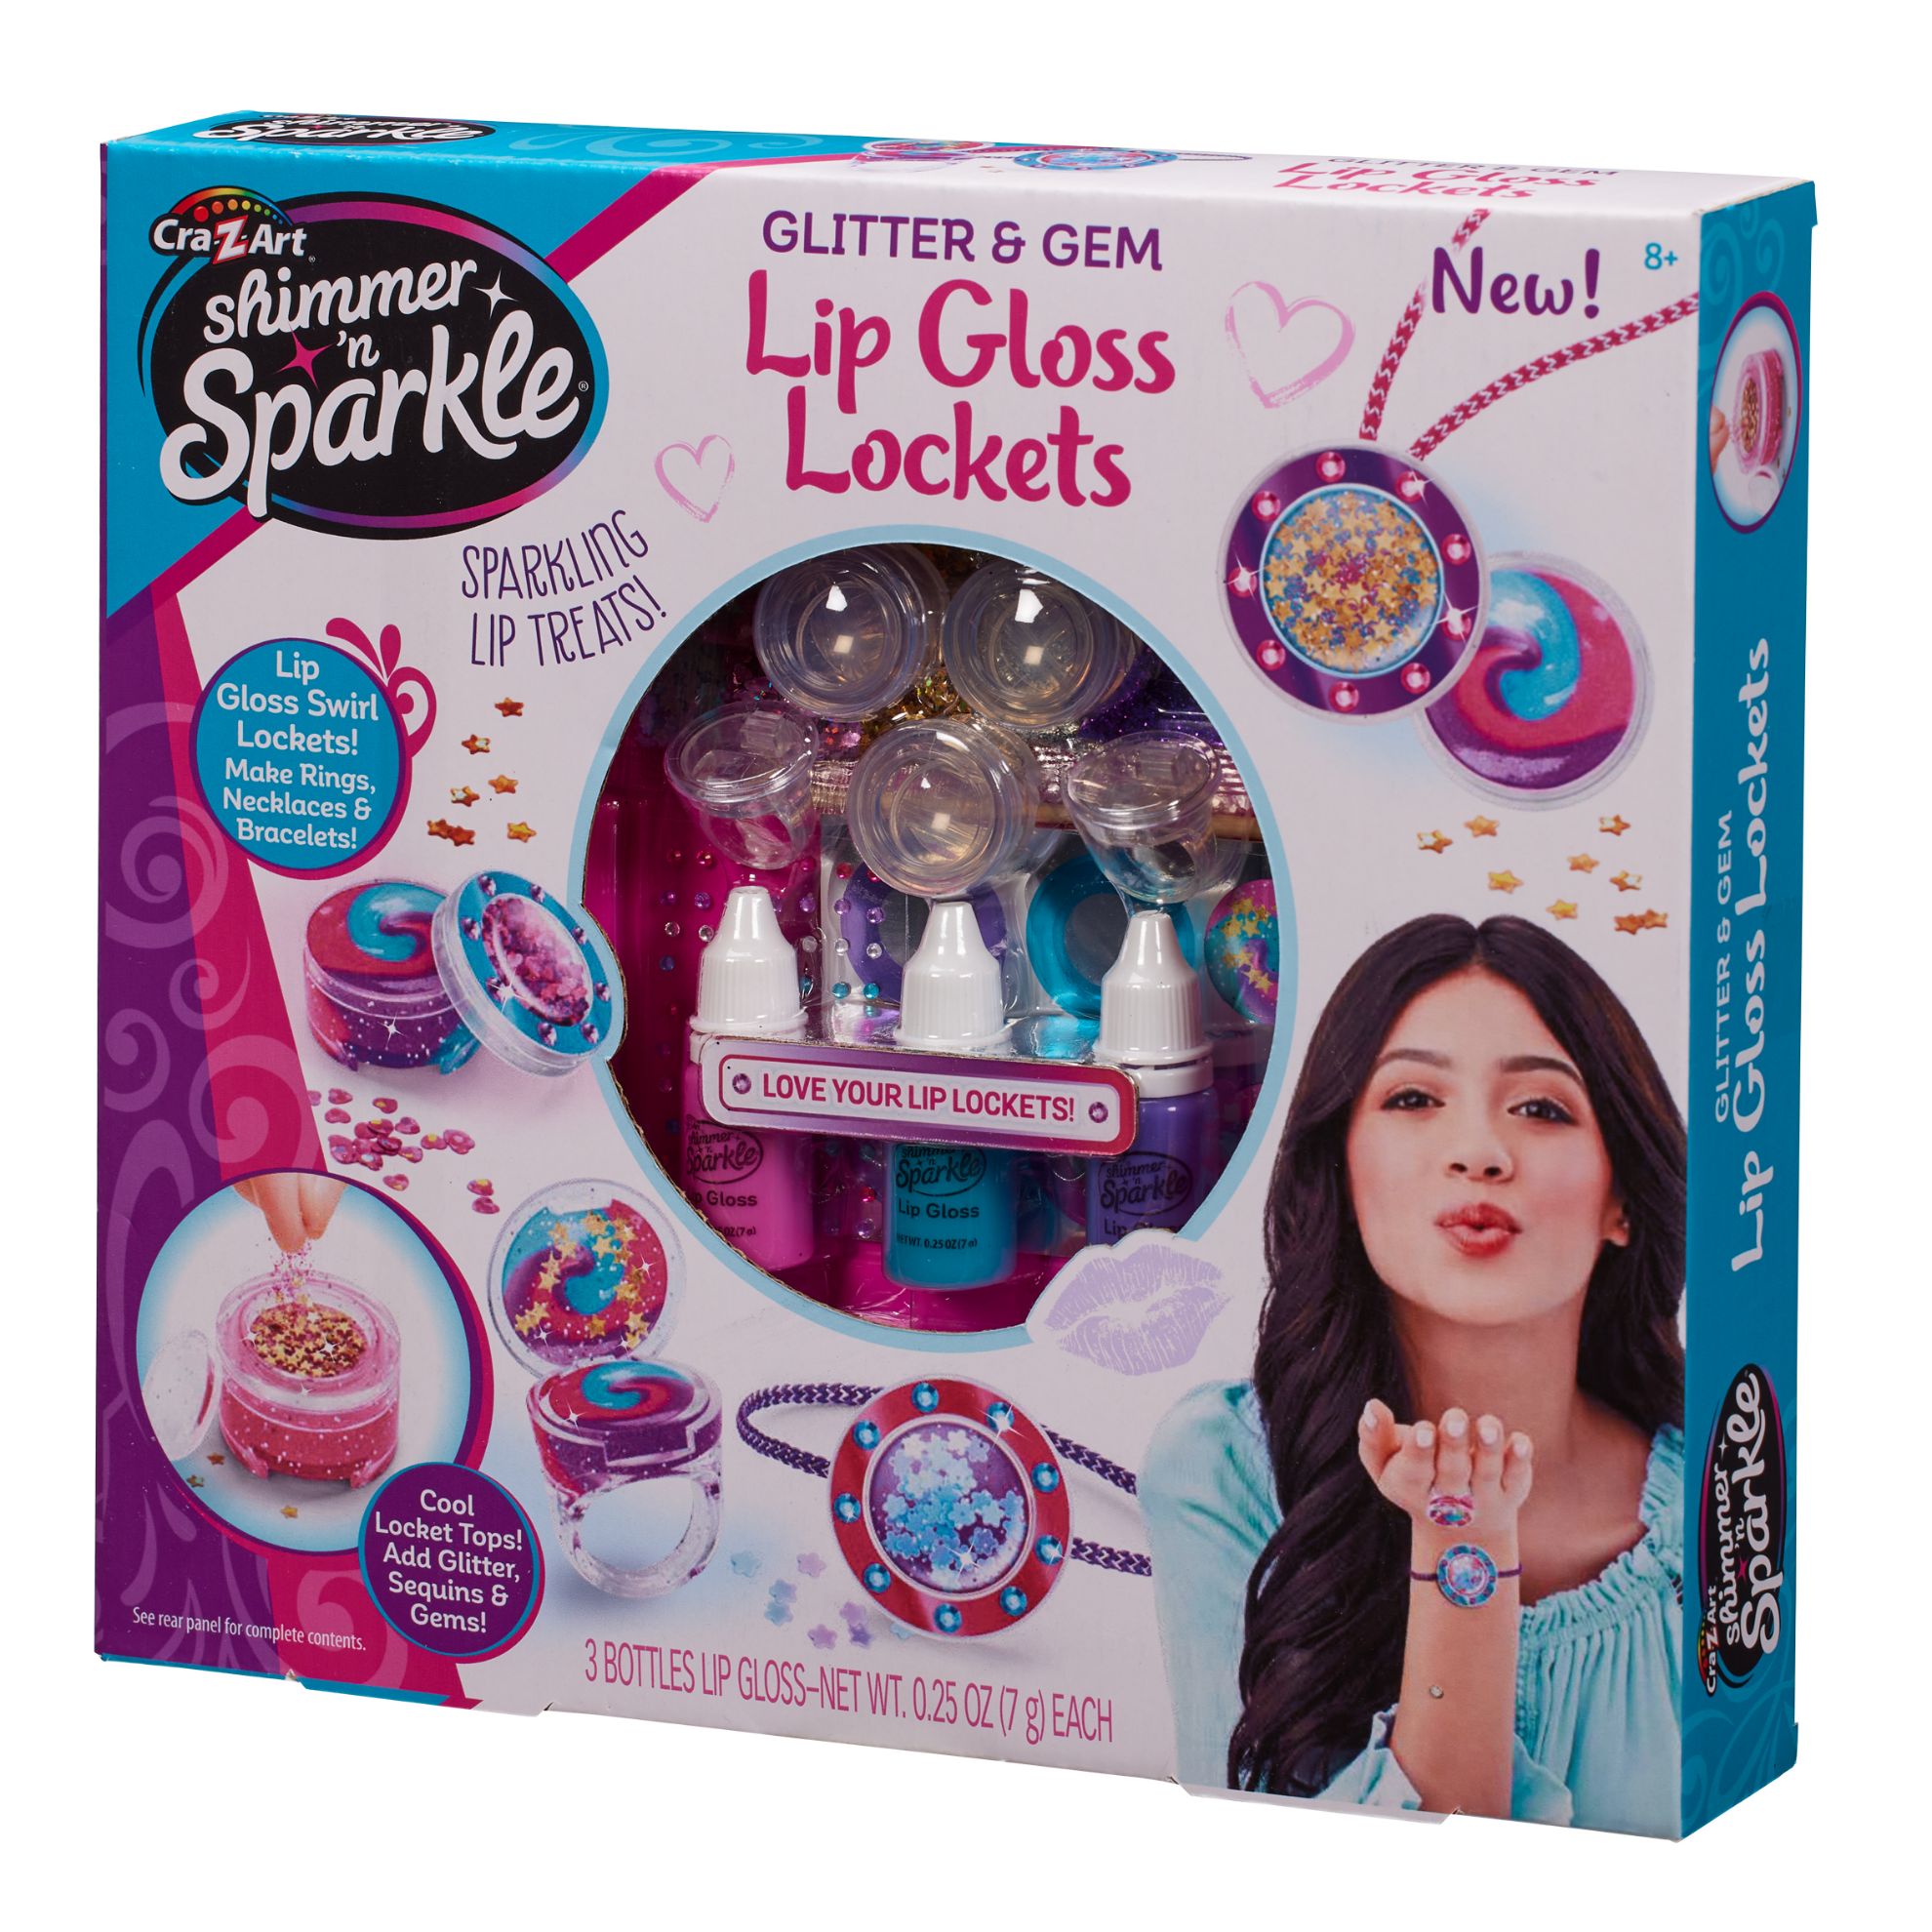 Picture of Shimmer N Sparkle Glitter and Gem Lip Gloss Lockets